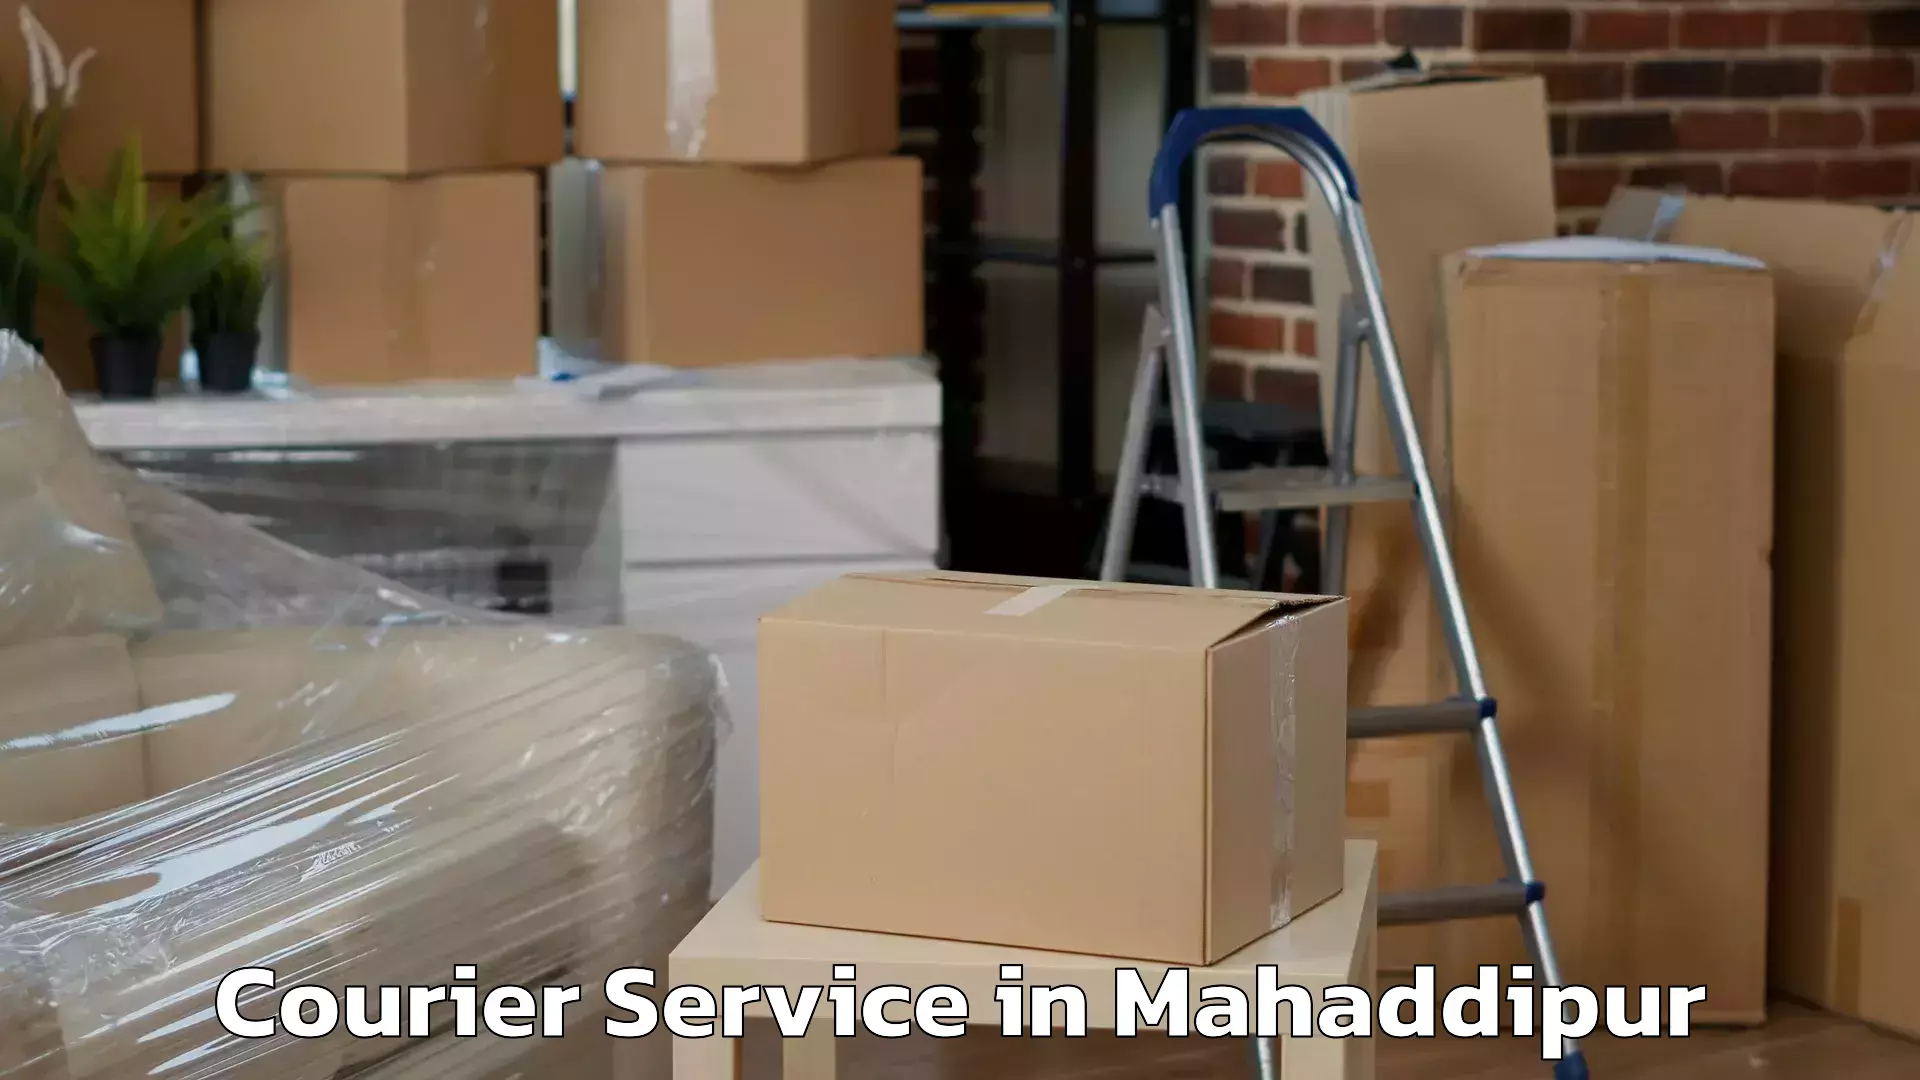 Efficient package consolidation in Mahaddipur